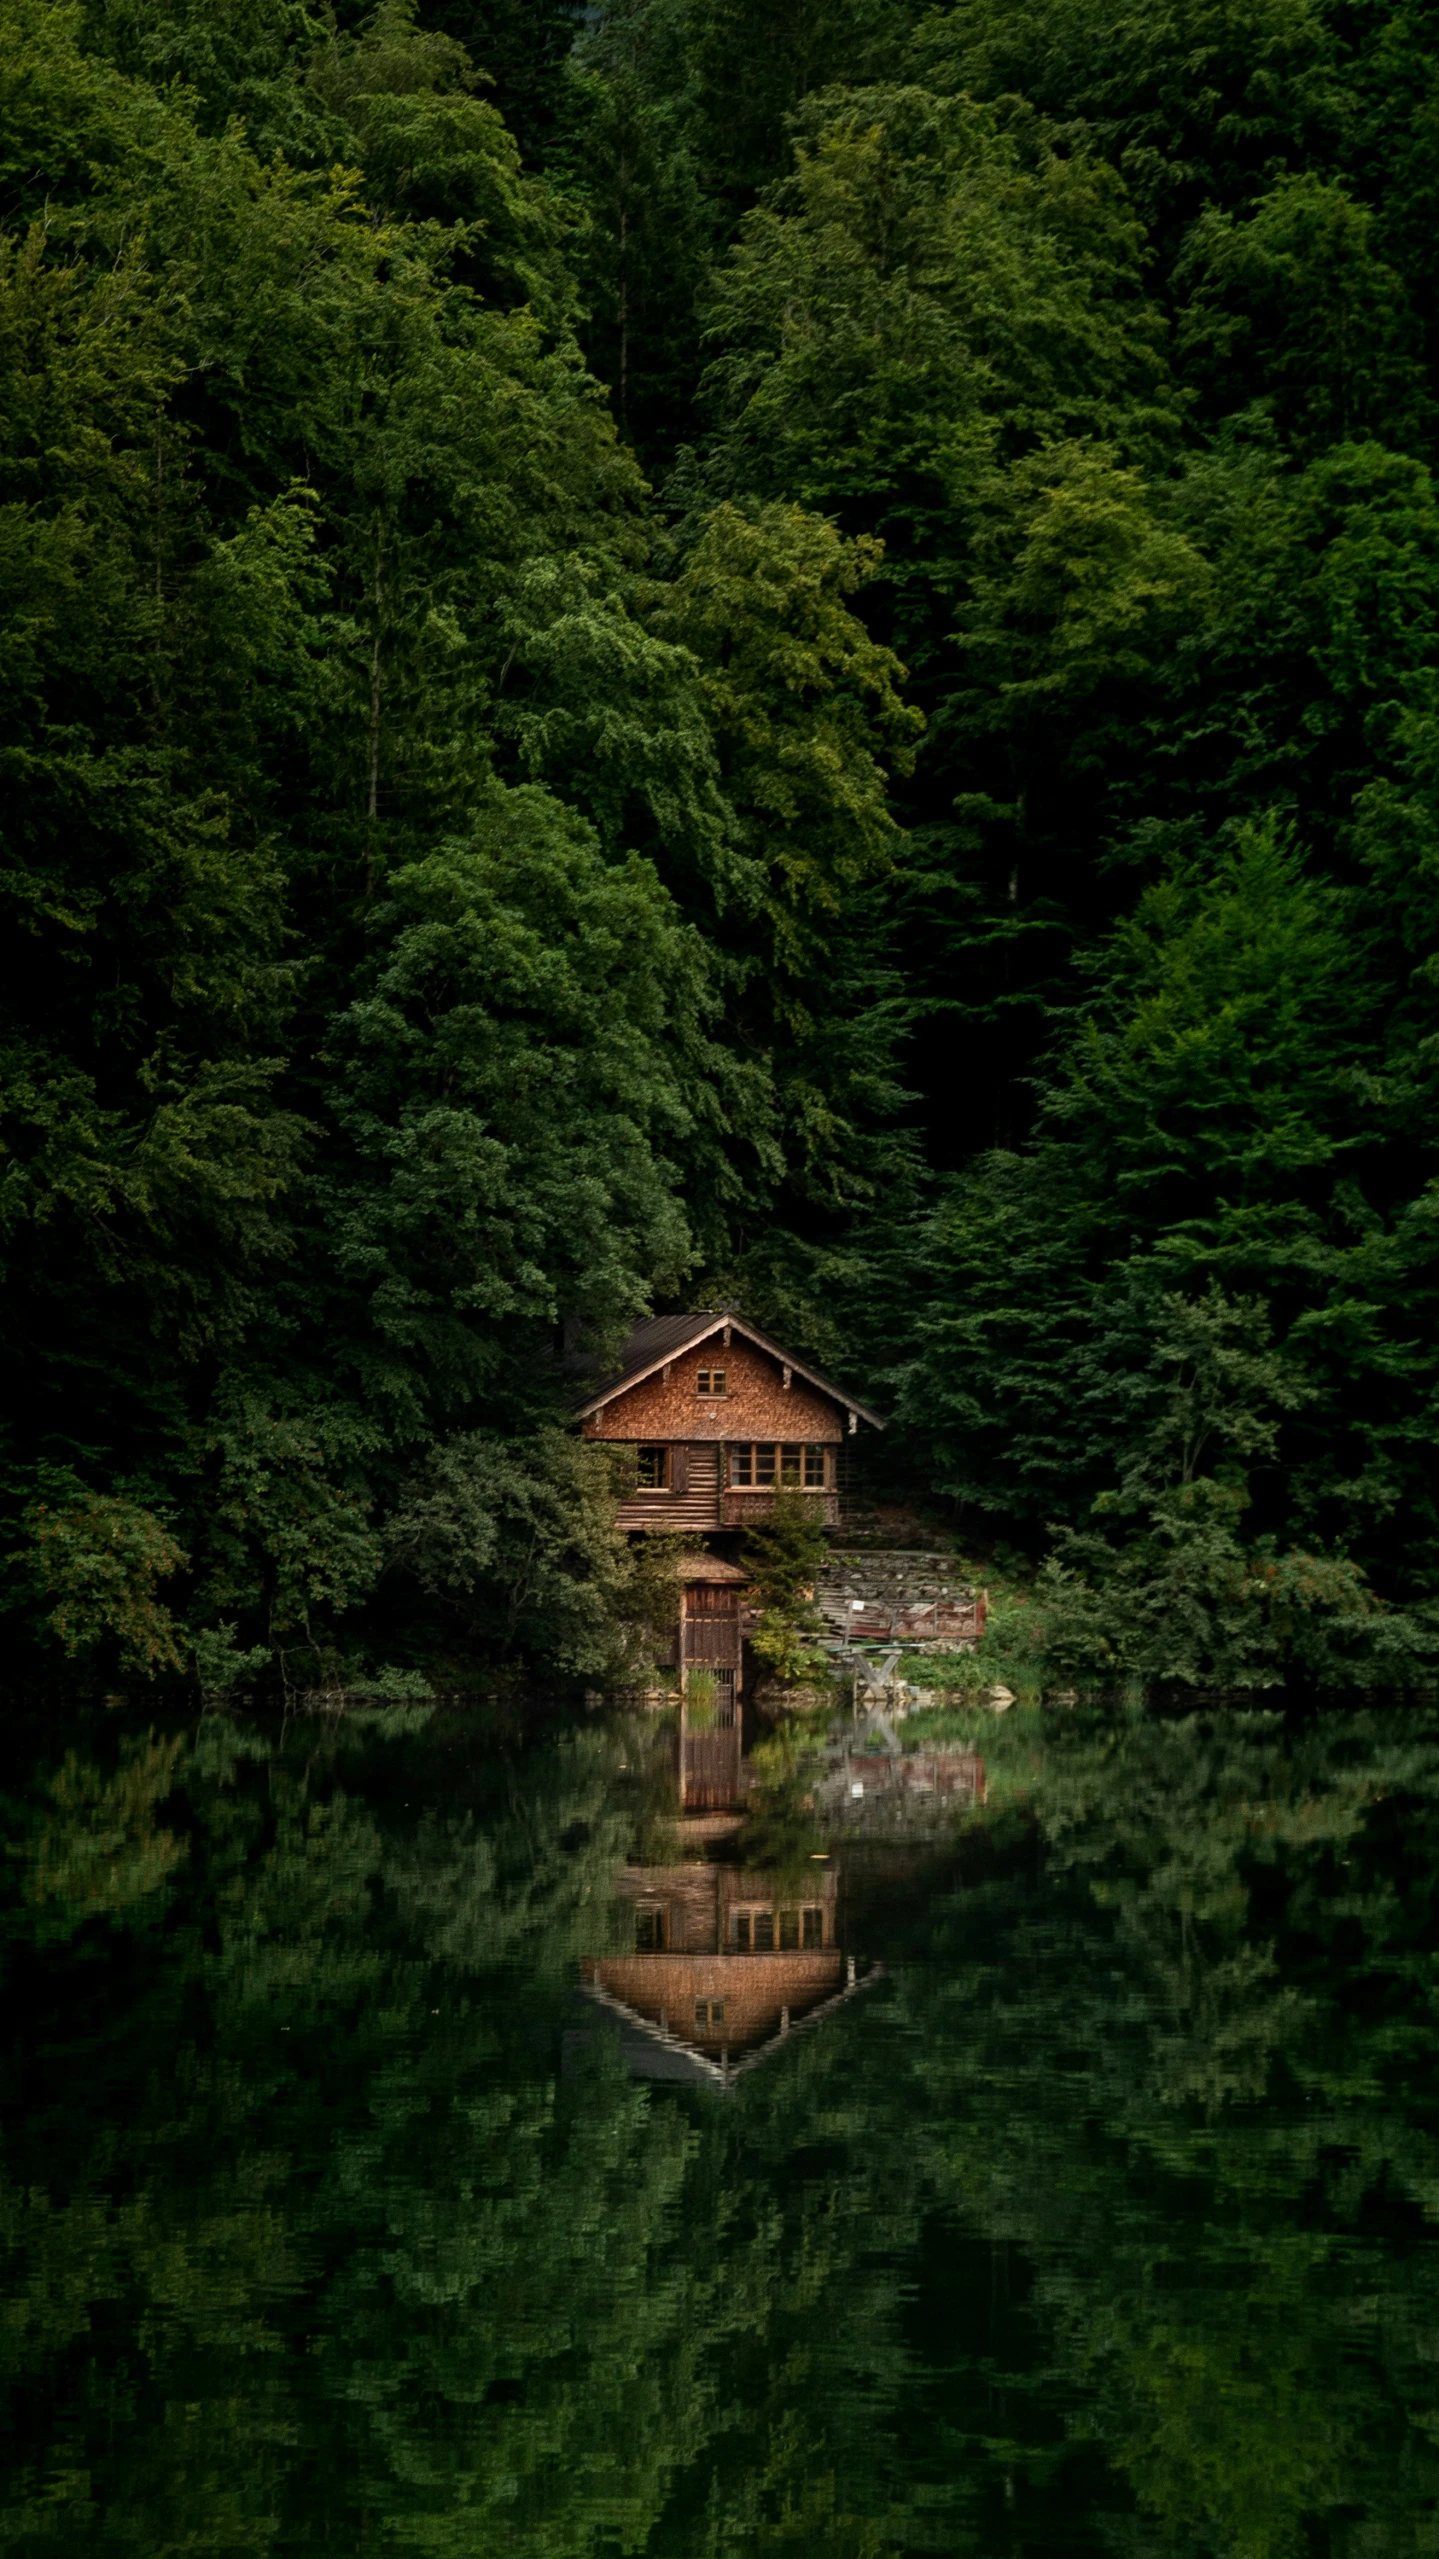 the house is by the pond in the forest